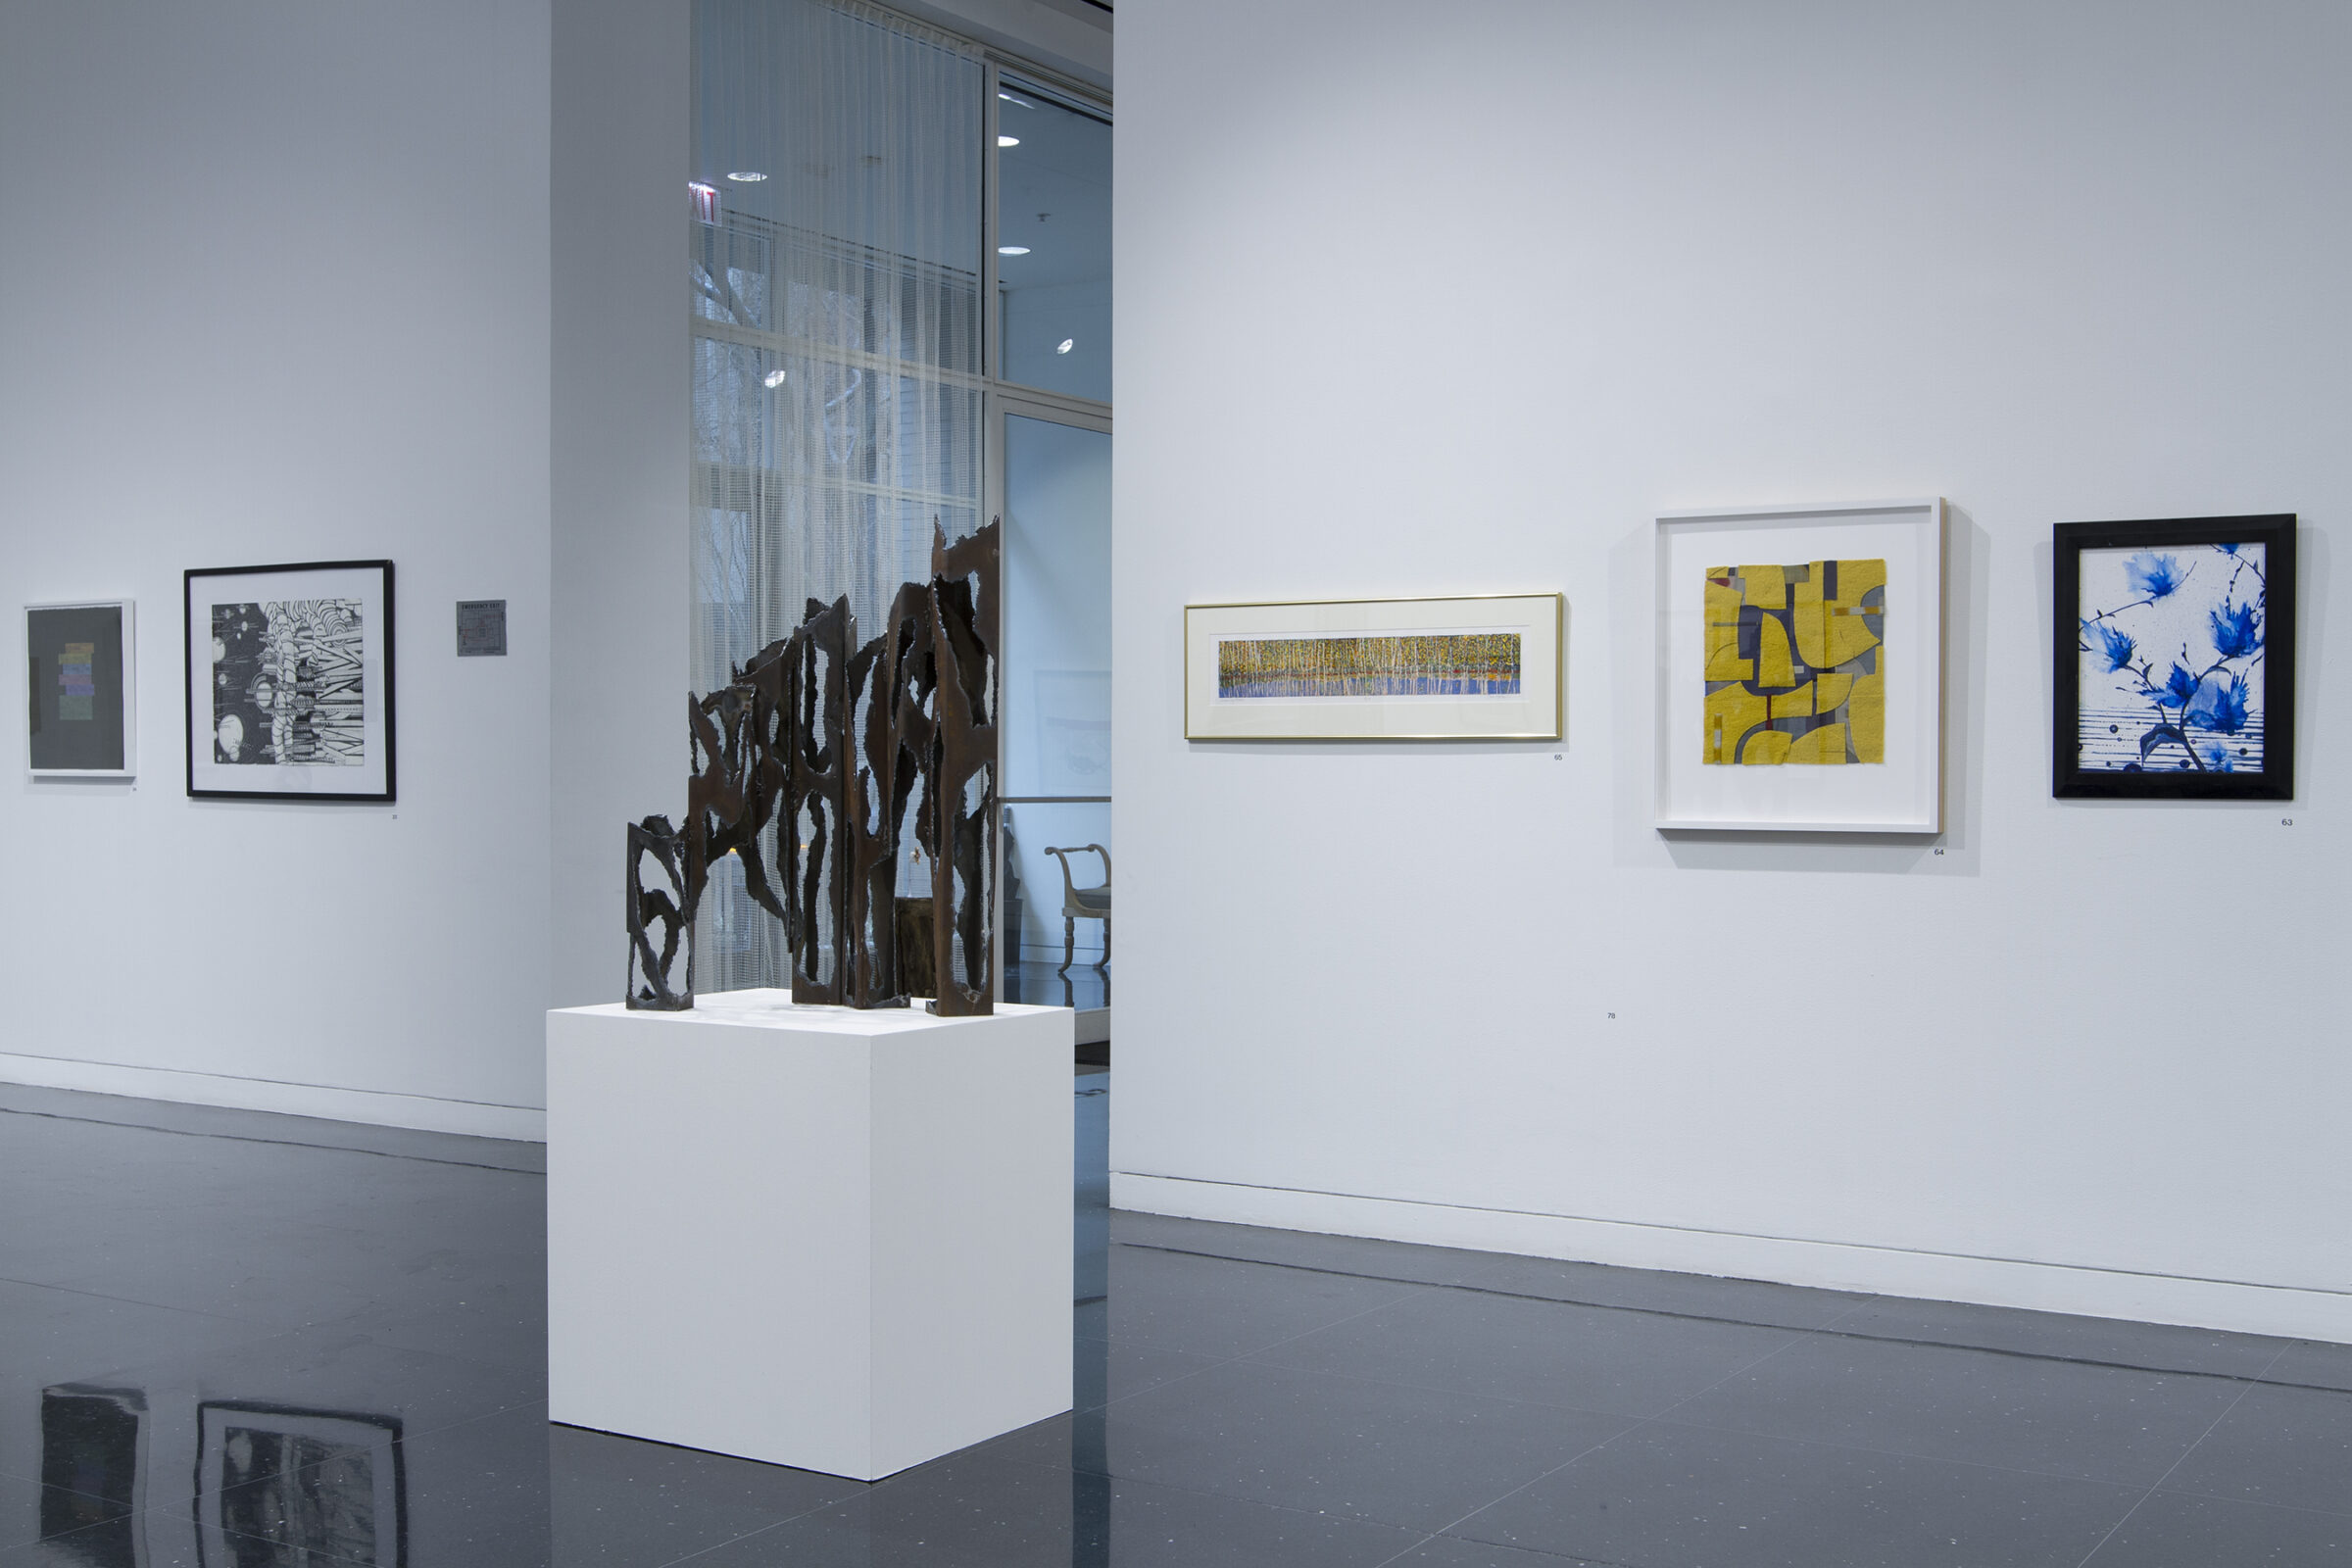 A white walled gallery space in which several paintings and framed artworks are aligned horizontally on the walls and a large abstract metal sculpture resembling an architectural form sits on a cube-shaped pedestal in the middle of the gallery.